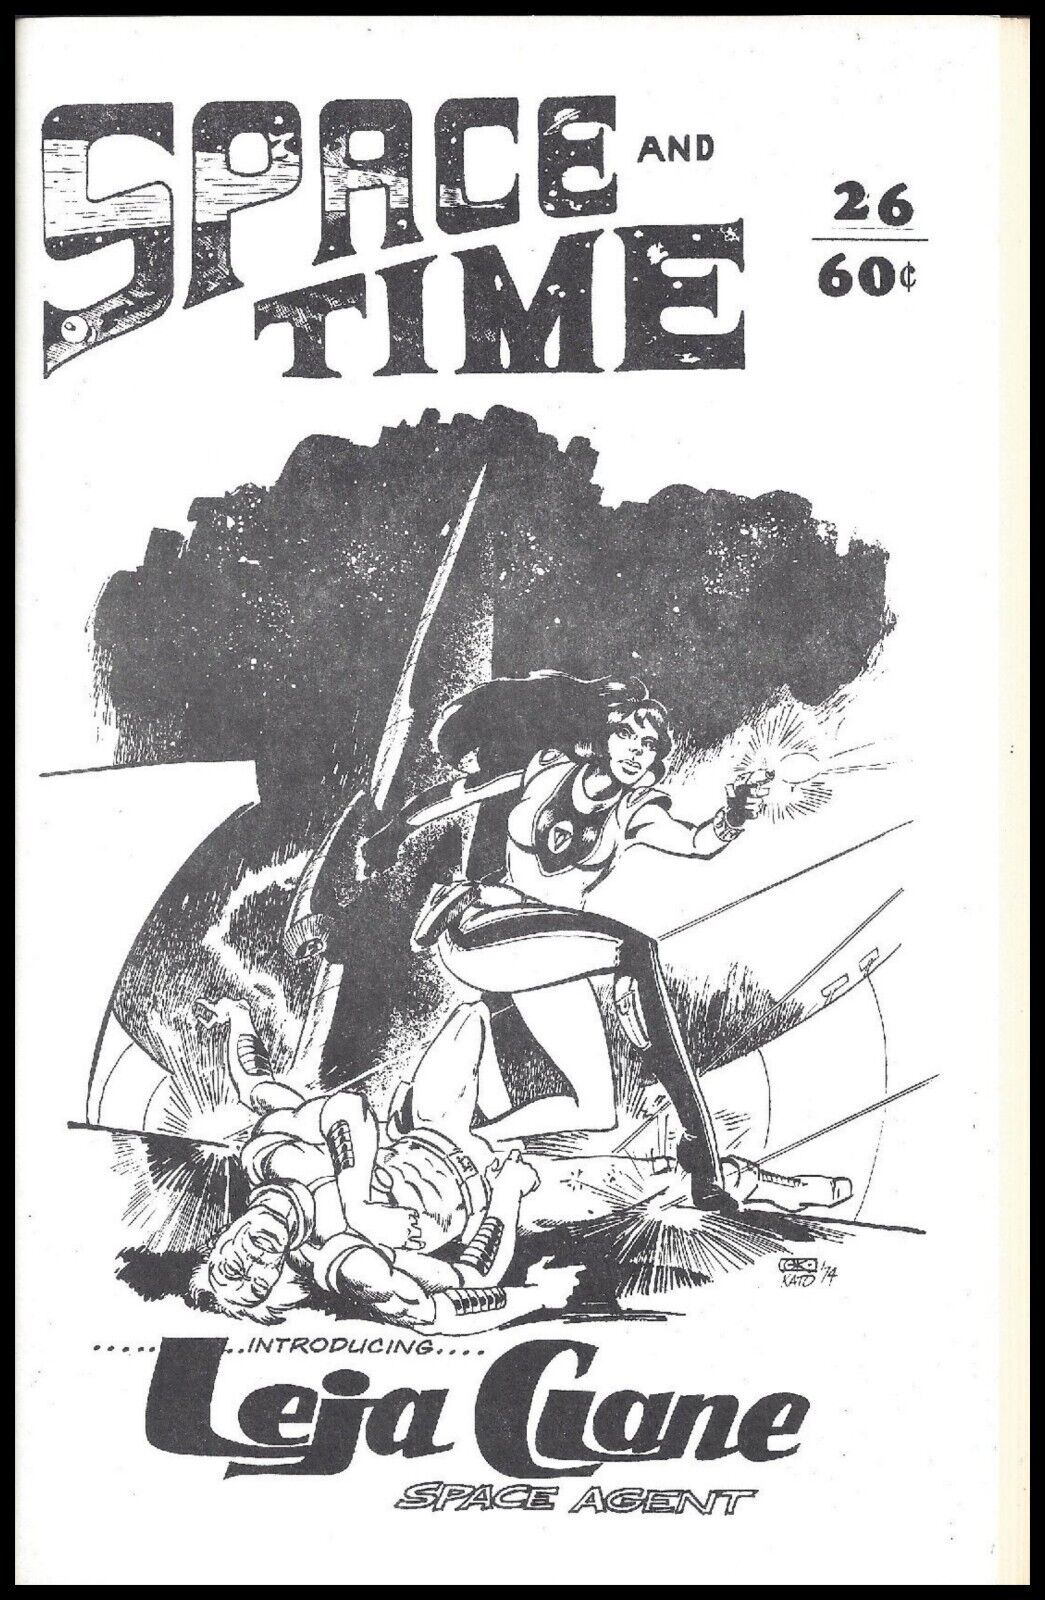 SPACE AND TIME Magazine #26 Leja Clane Space Agent 1974 Underground 1st Print VG